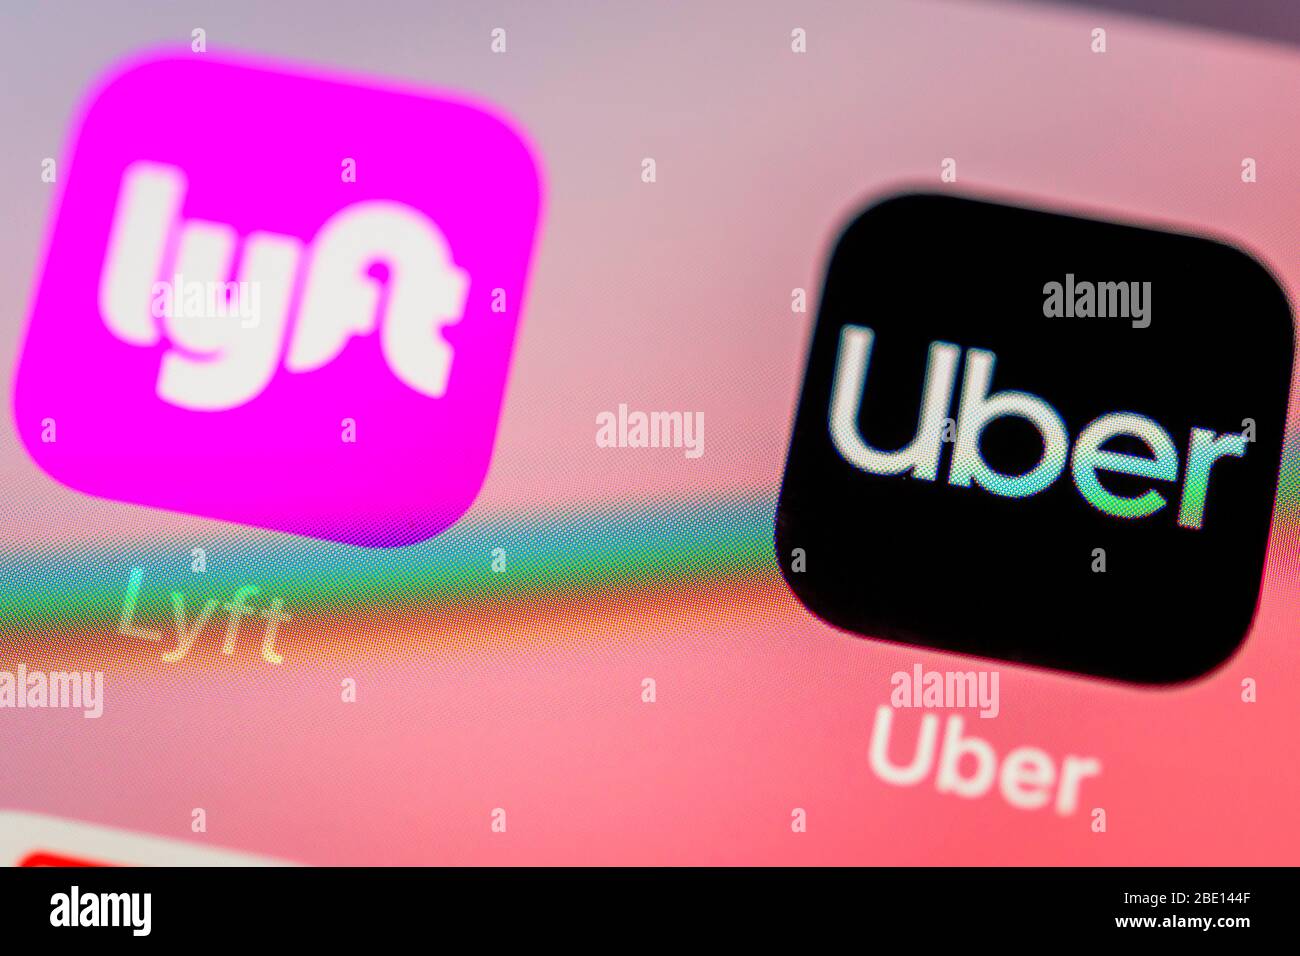 Uber and Lyft App, taxi service, icon, logo, display, iPhone, mobile phone, smartphone, iOS, macro shot, detail, full format Stock Photo